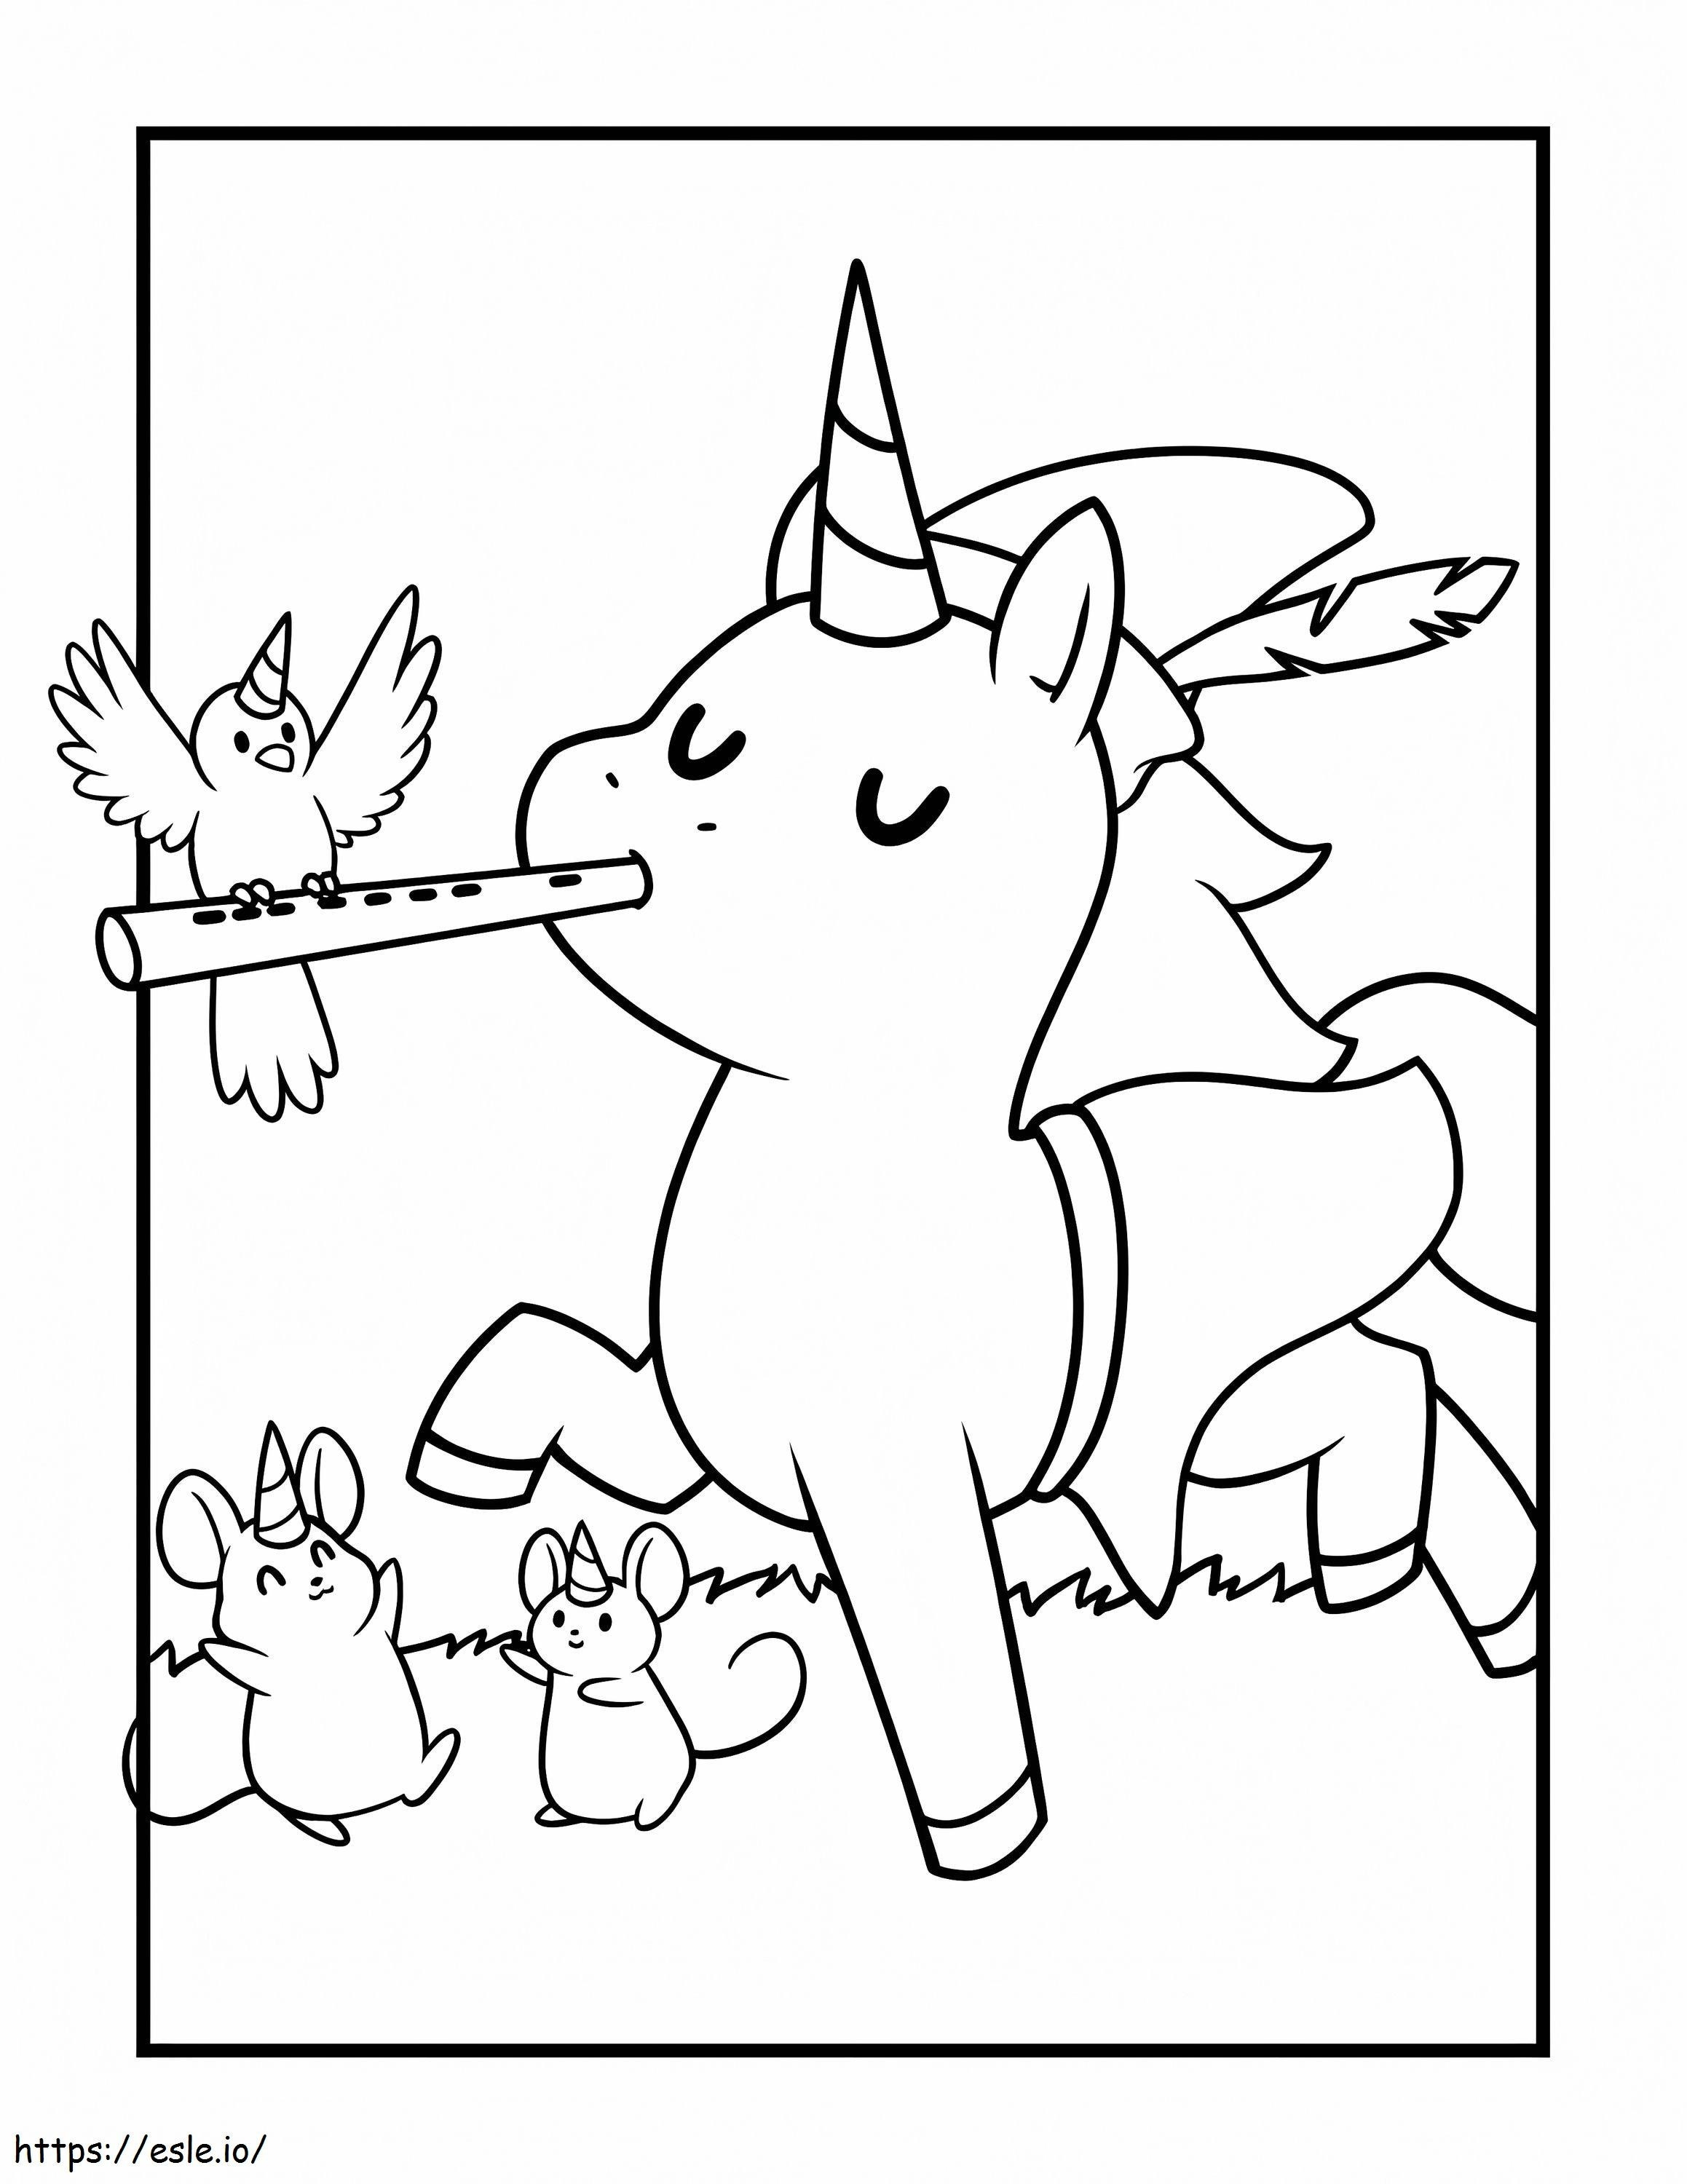 Unicorn With Bird And Mouse 791X1024 coloring page